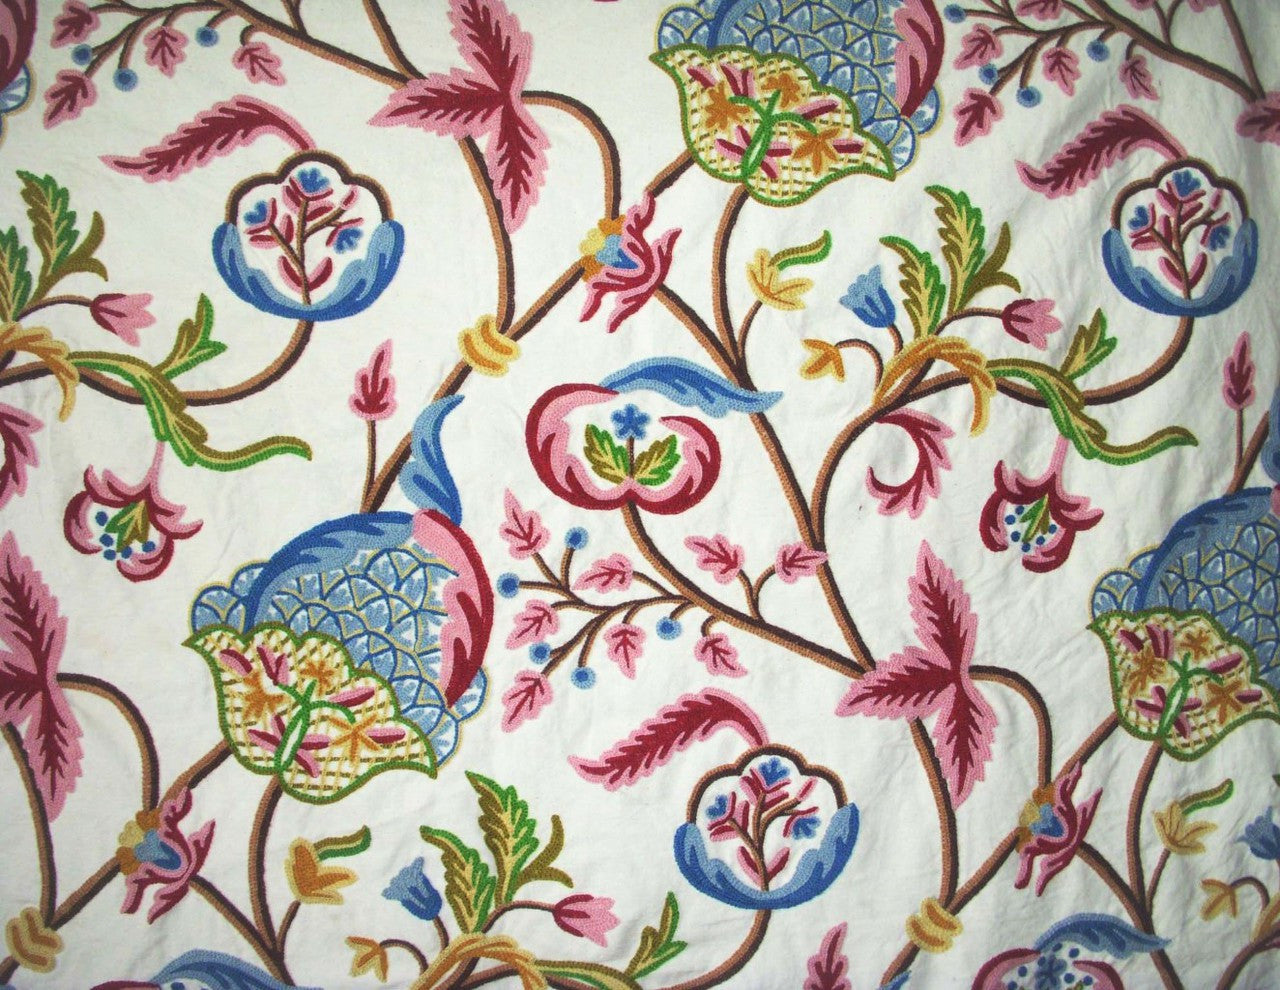 Pink and Blue Floral Cotton Crewel Embroidery Fabric #FLR205